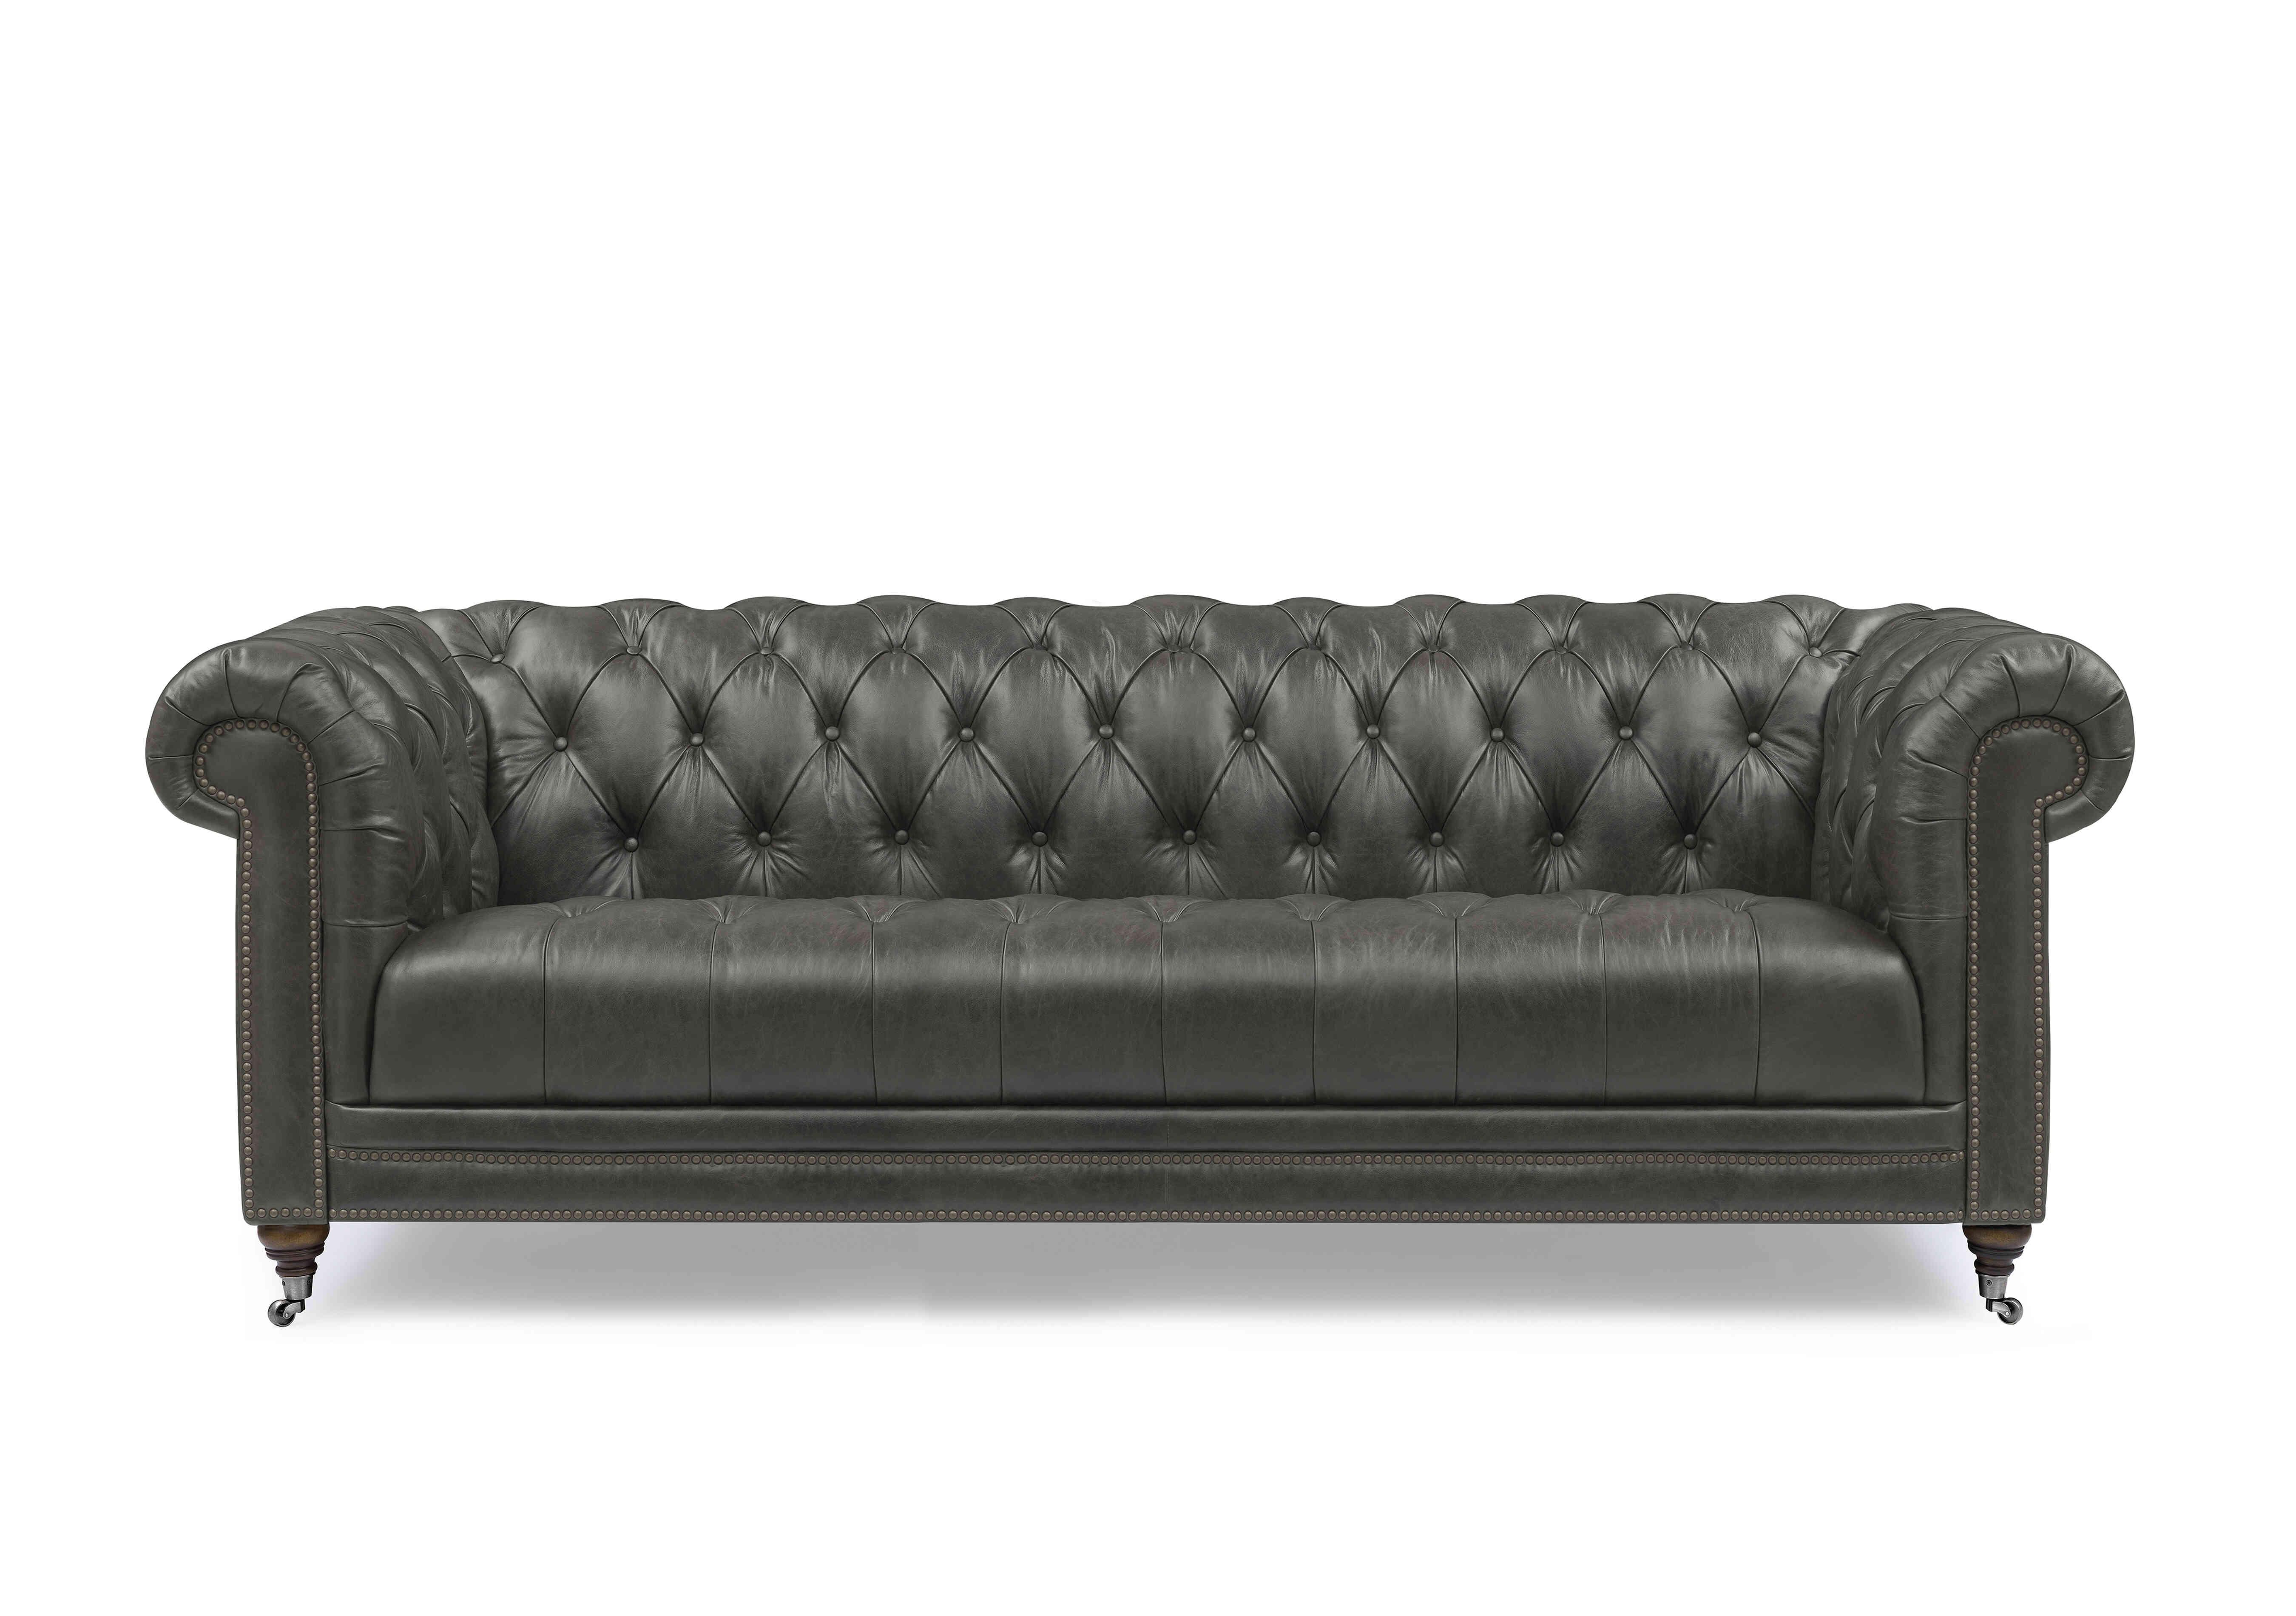 Walter 4 Seater Leather Chesterfield Sofa in X3y2-1966ls Granite on Furniture Village